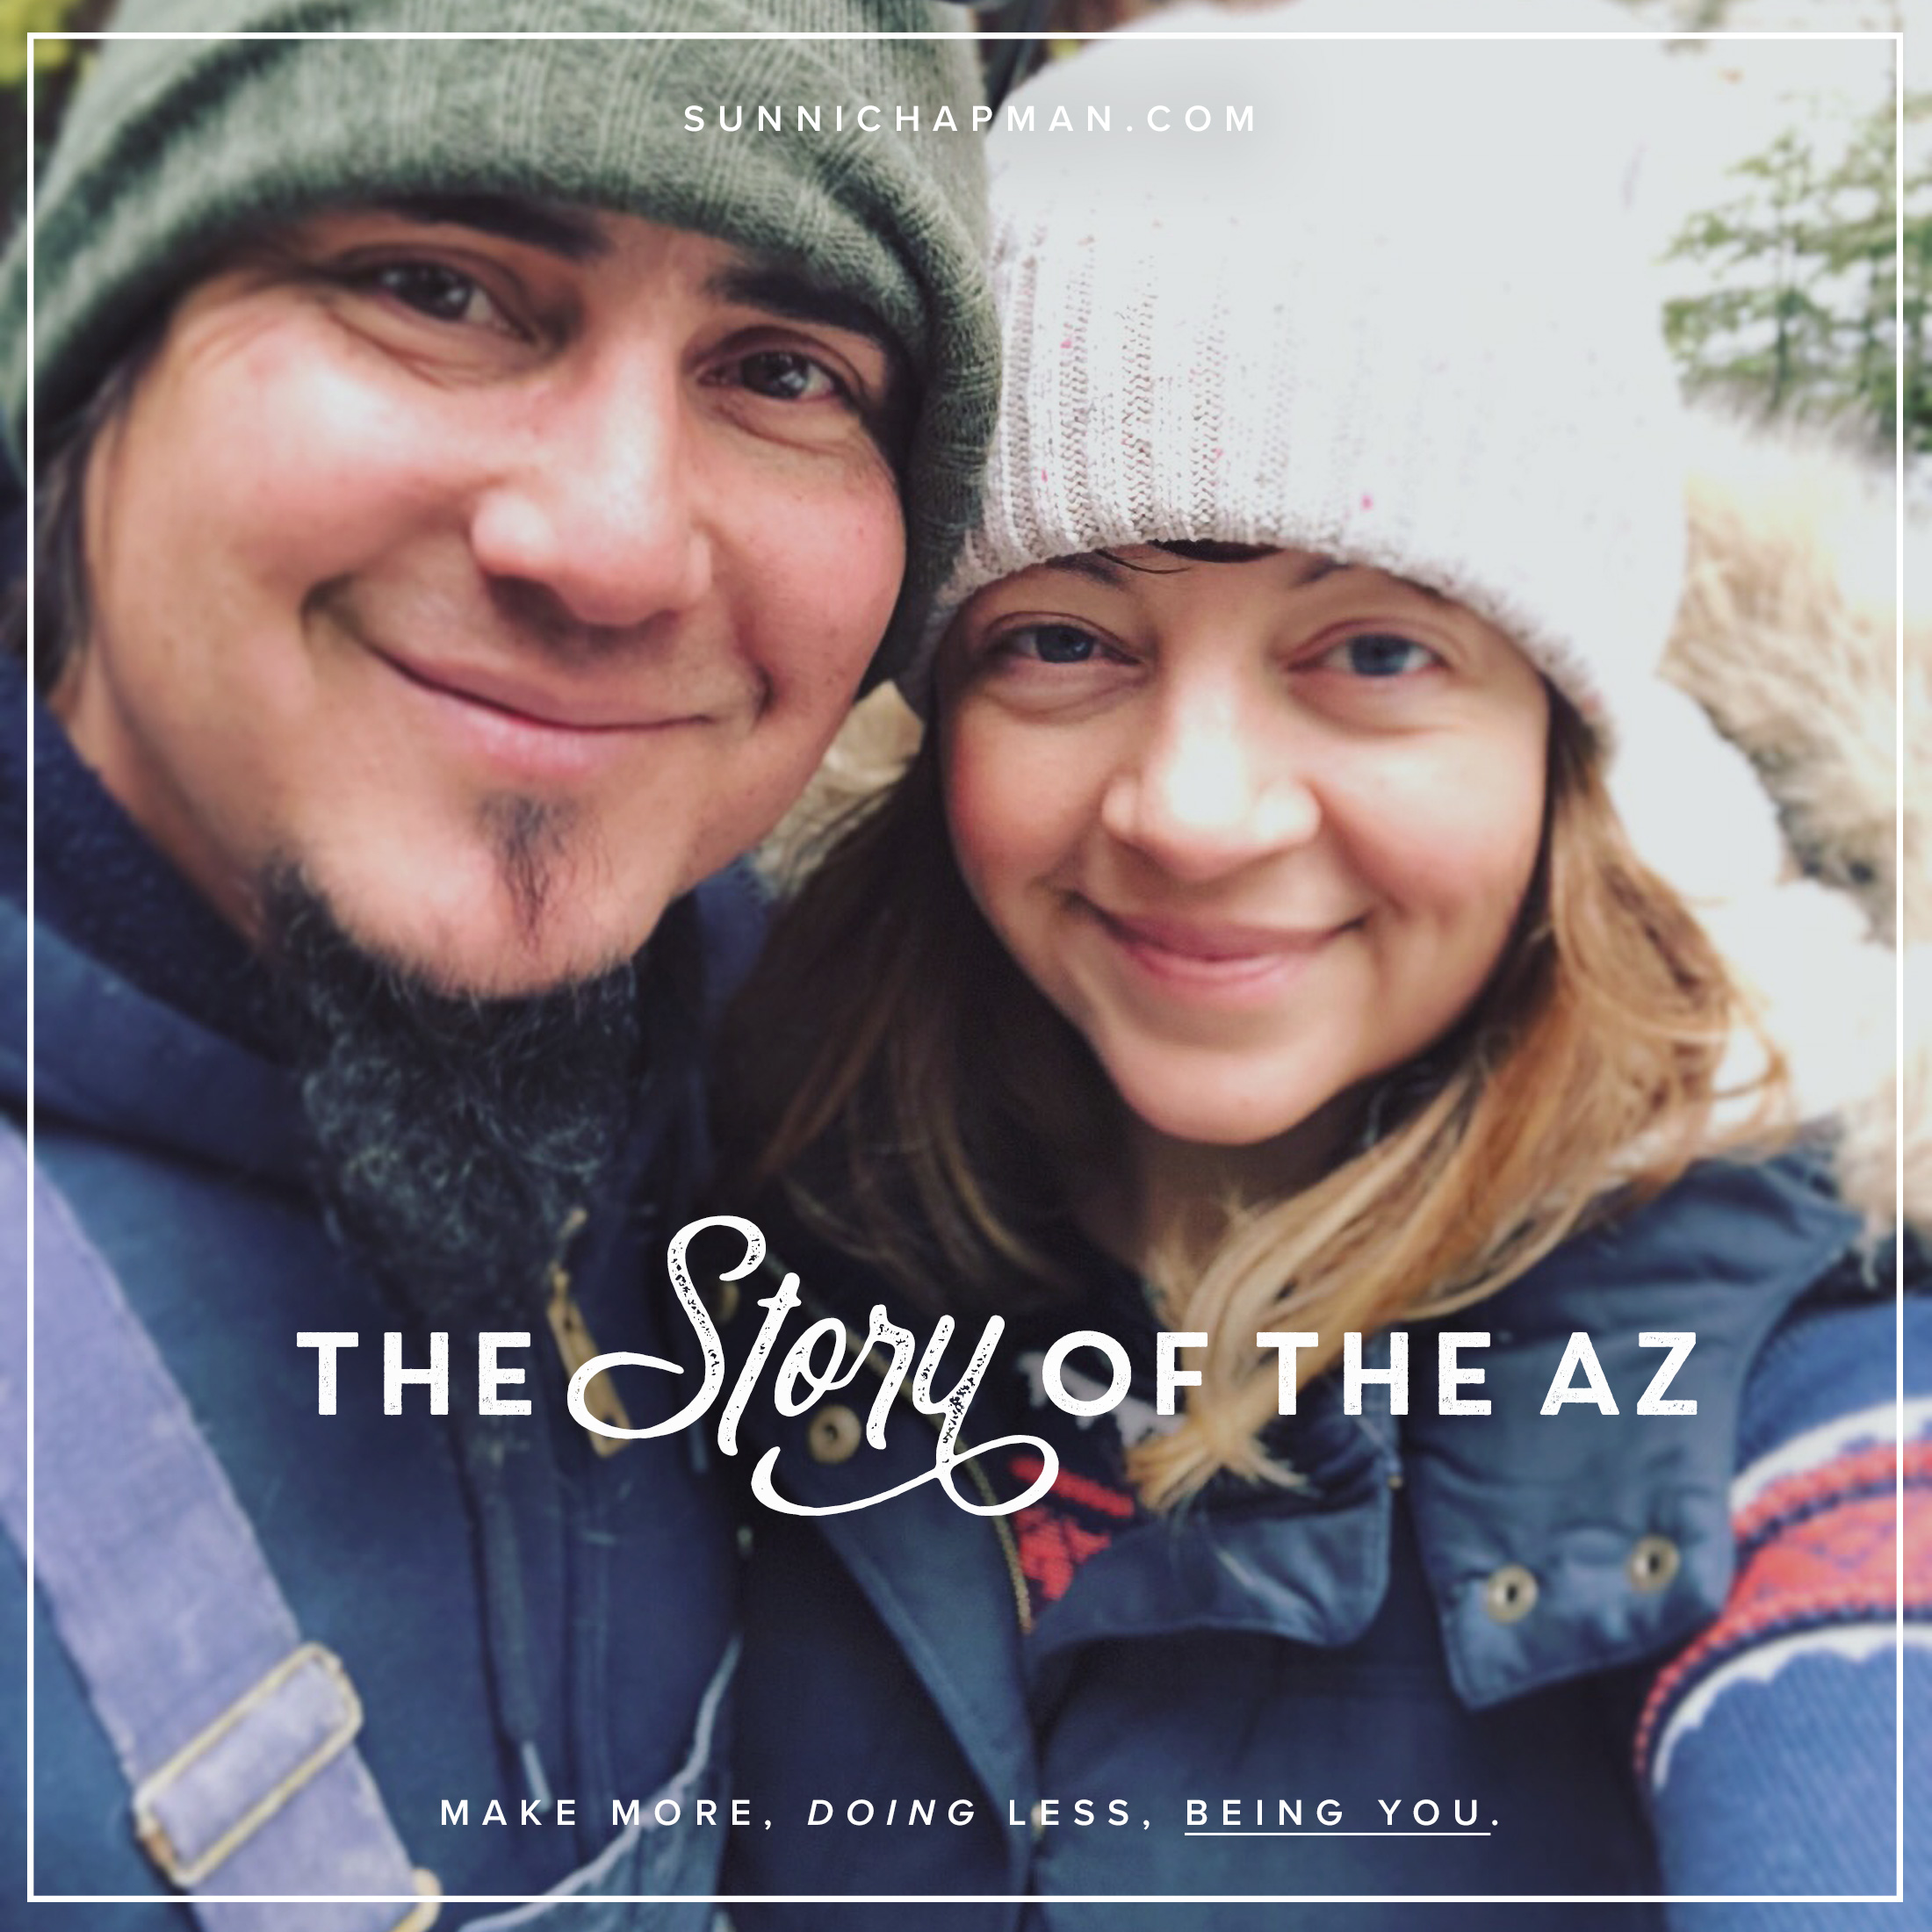 A close-up selfie of a smiling couple (Sunni Chapman and her husband) wearing winter hats and jackets. The man on the left wears a green beanie and a blue scarf, while the woman on the right wears a white beanie and a plaid coat. Behind them is a blurred natural backdrop suggesting a cold weather setting. Overlaid text at the bottom reads 'THE STORY OF THE AZ' in elegant script, followed by 'MAKE MORE, DOING LESS, BEING YOU.' and the website 'SUNNICHAPMAN.COM' at the top.